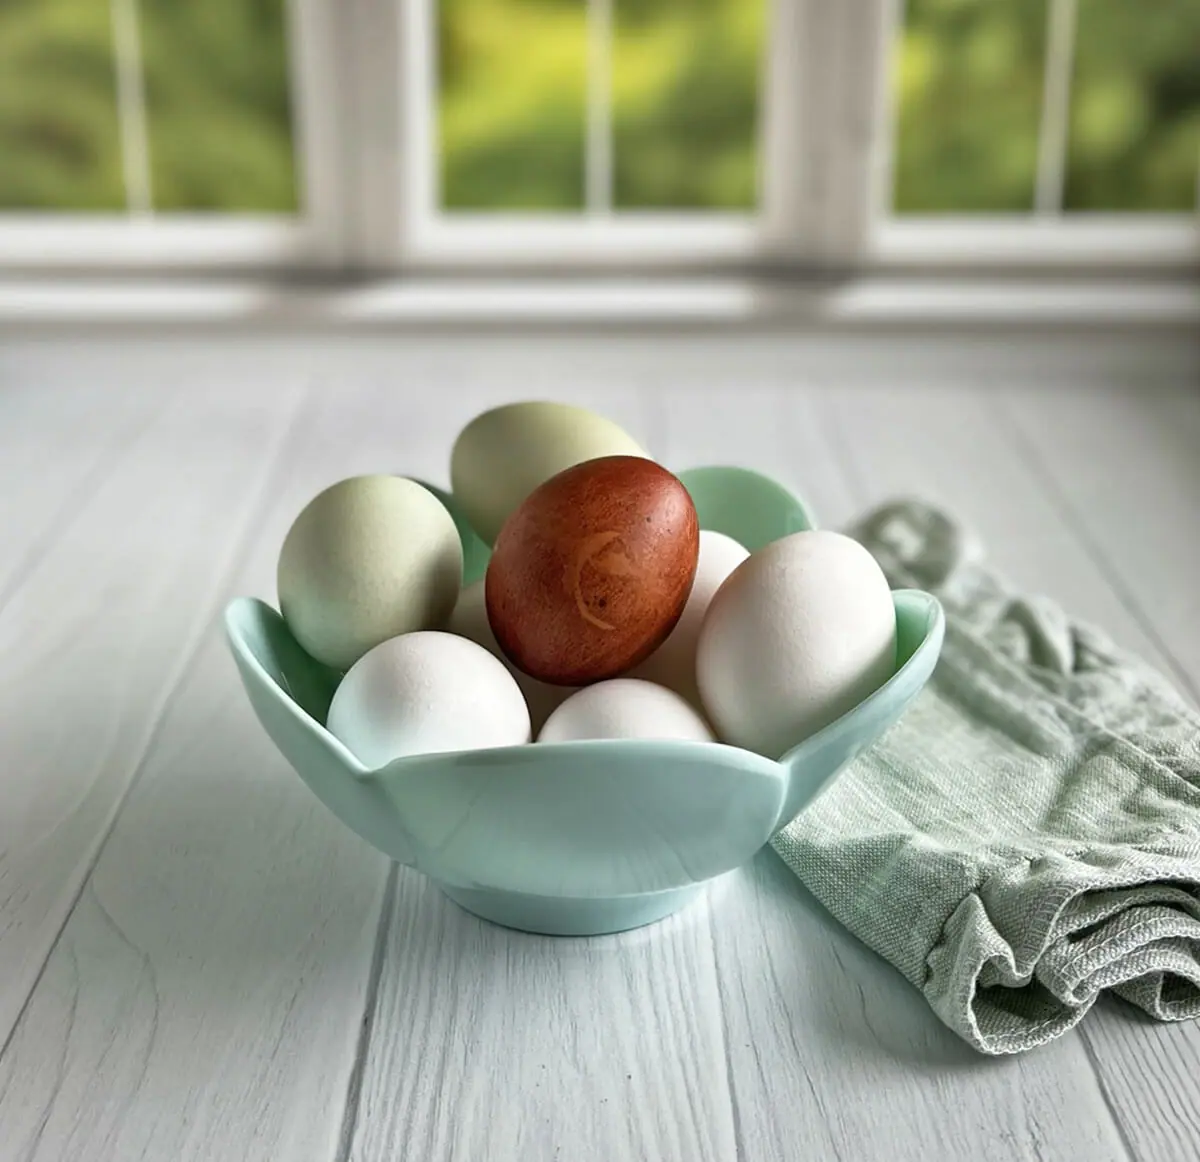 How to make Instant Pot hard boiled eggs